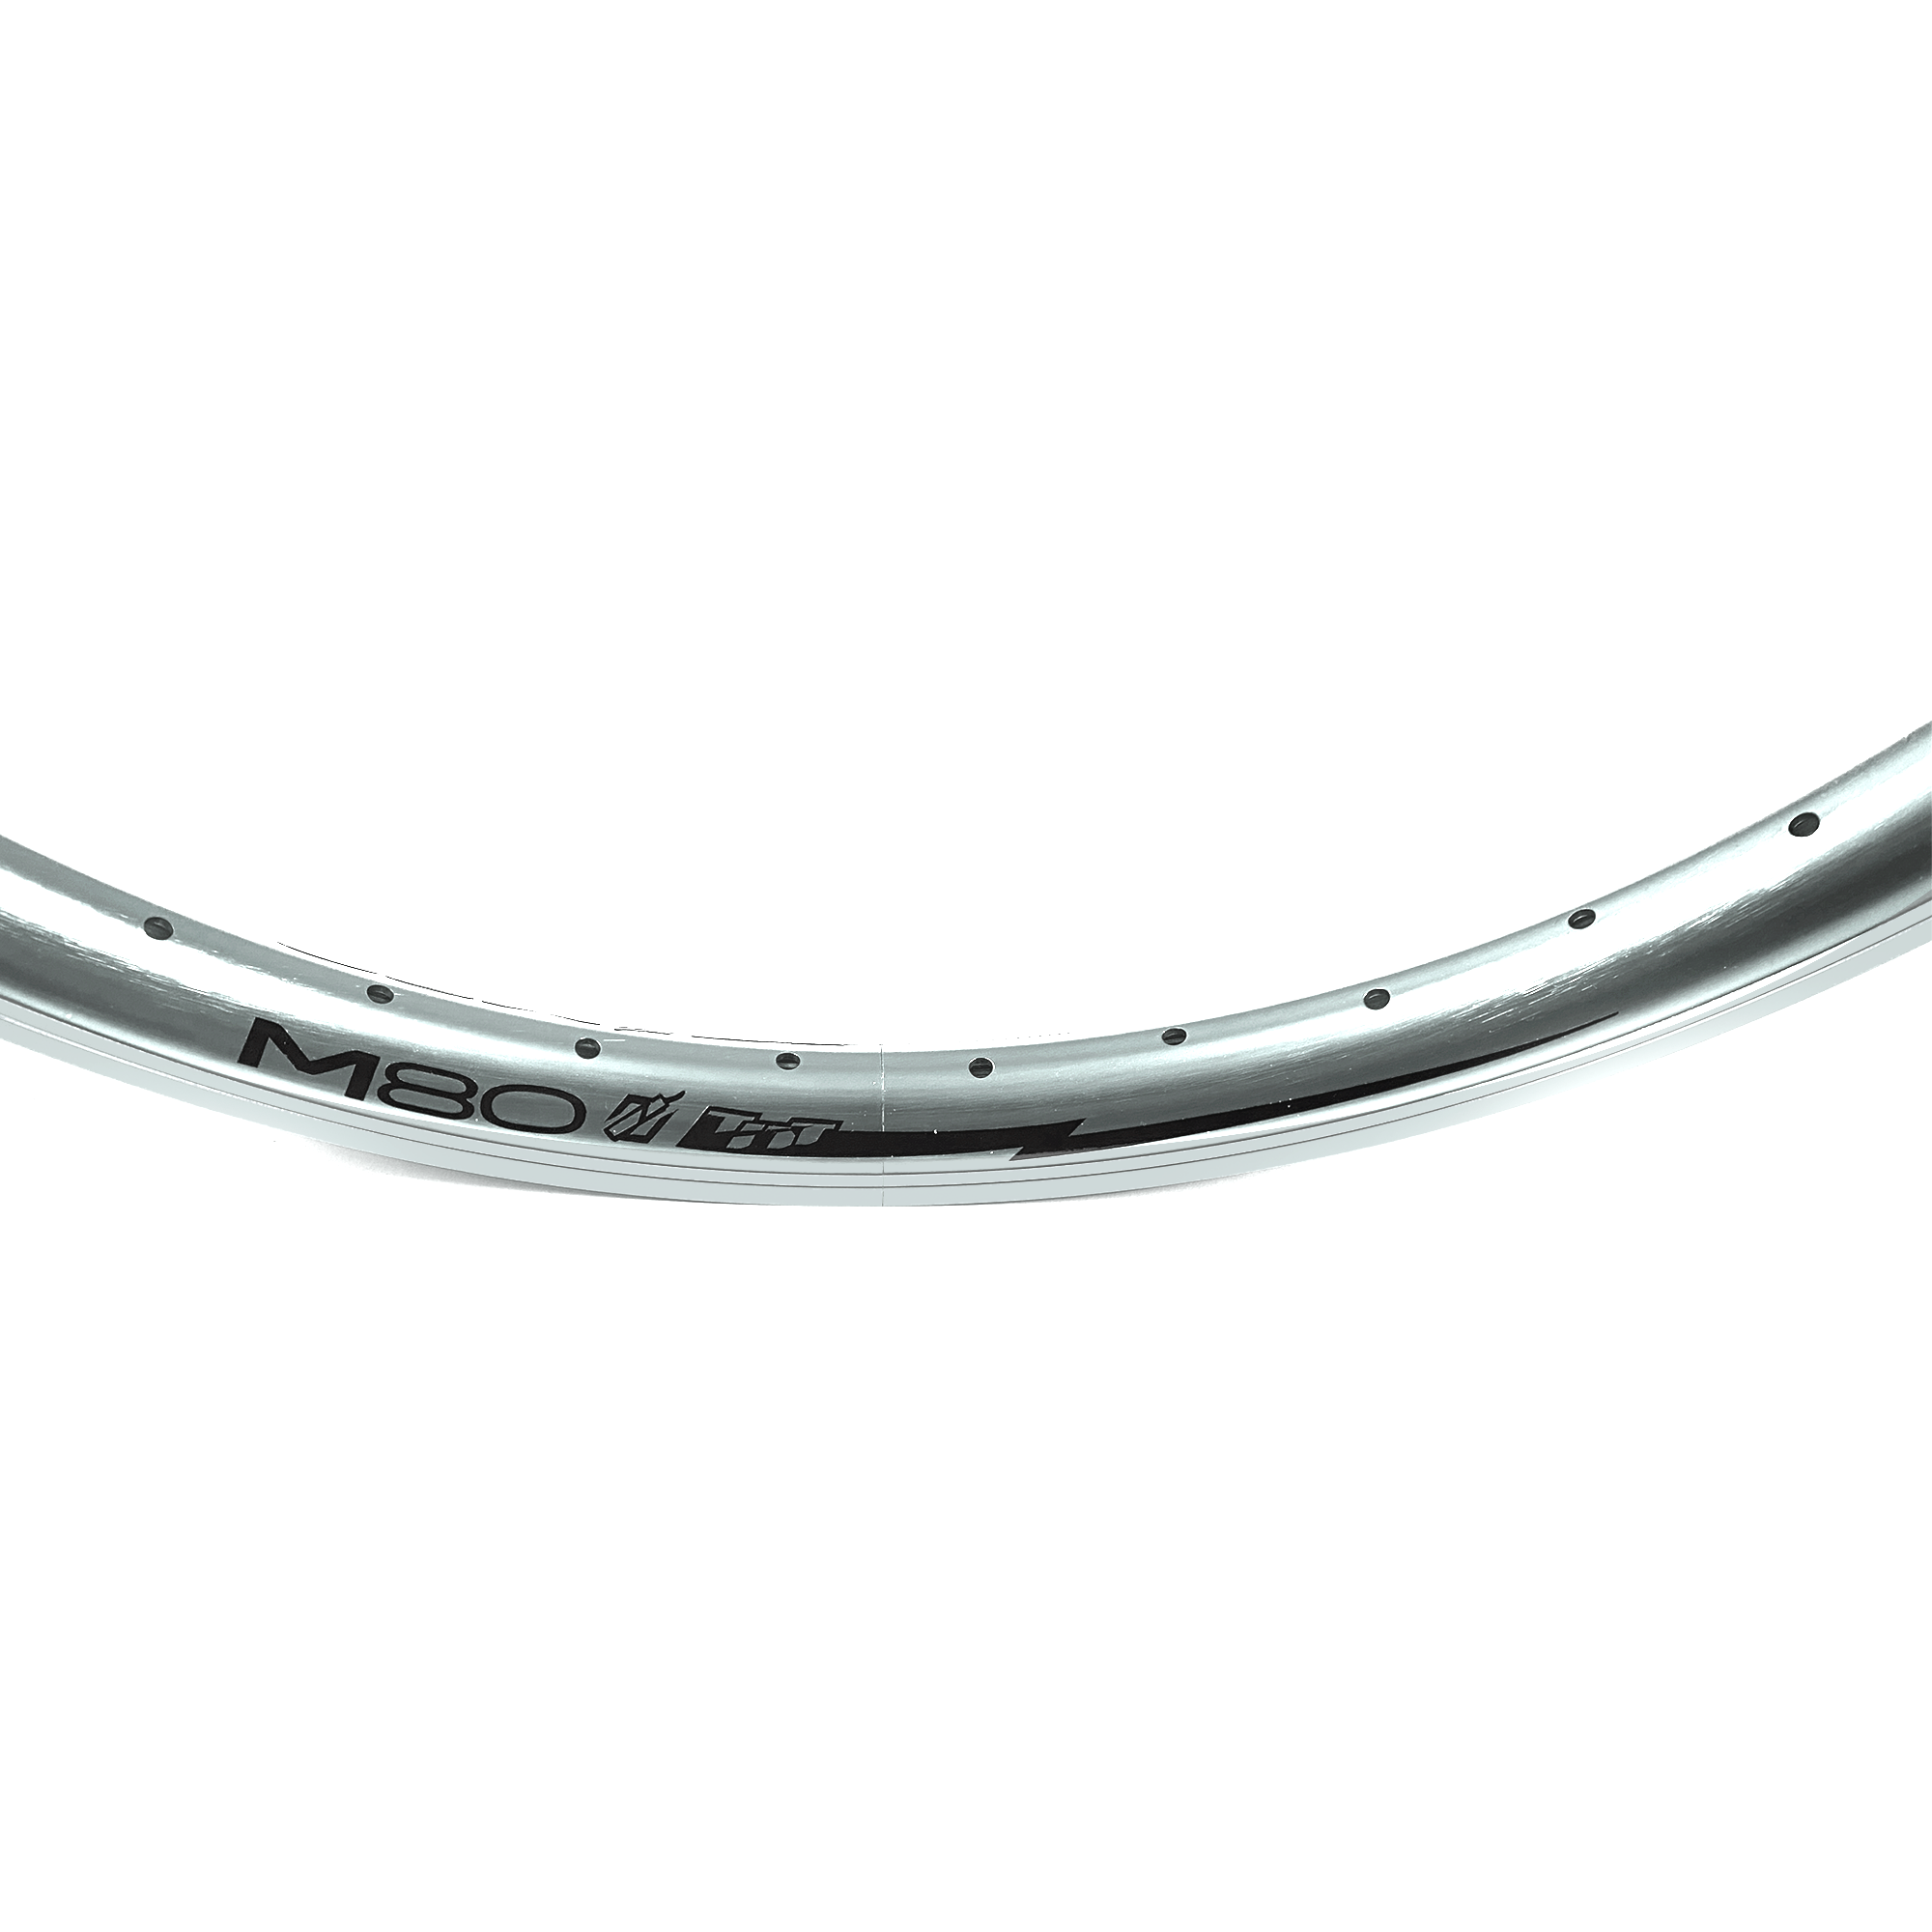 20" (406mm) TNT M80X Double Wall Rim - 36H - Silver Anodized